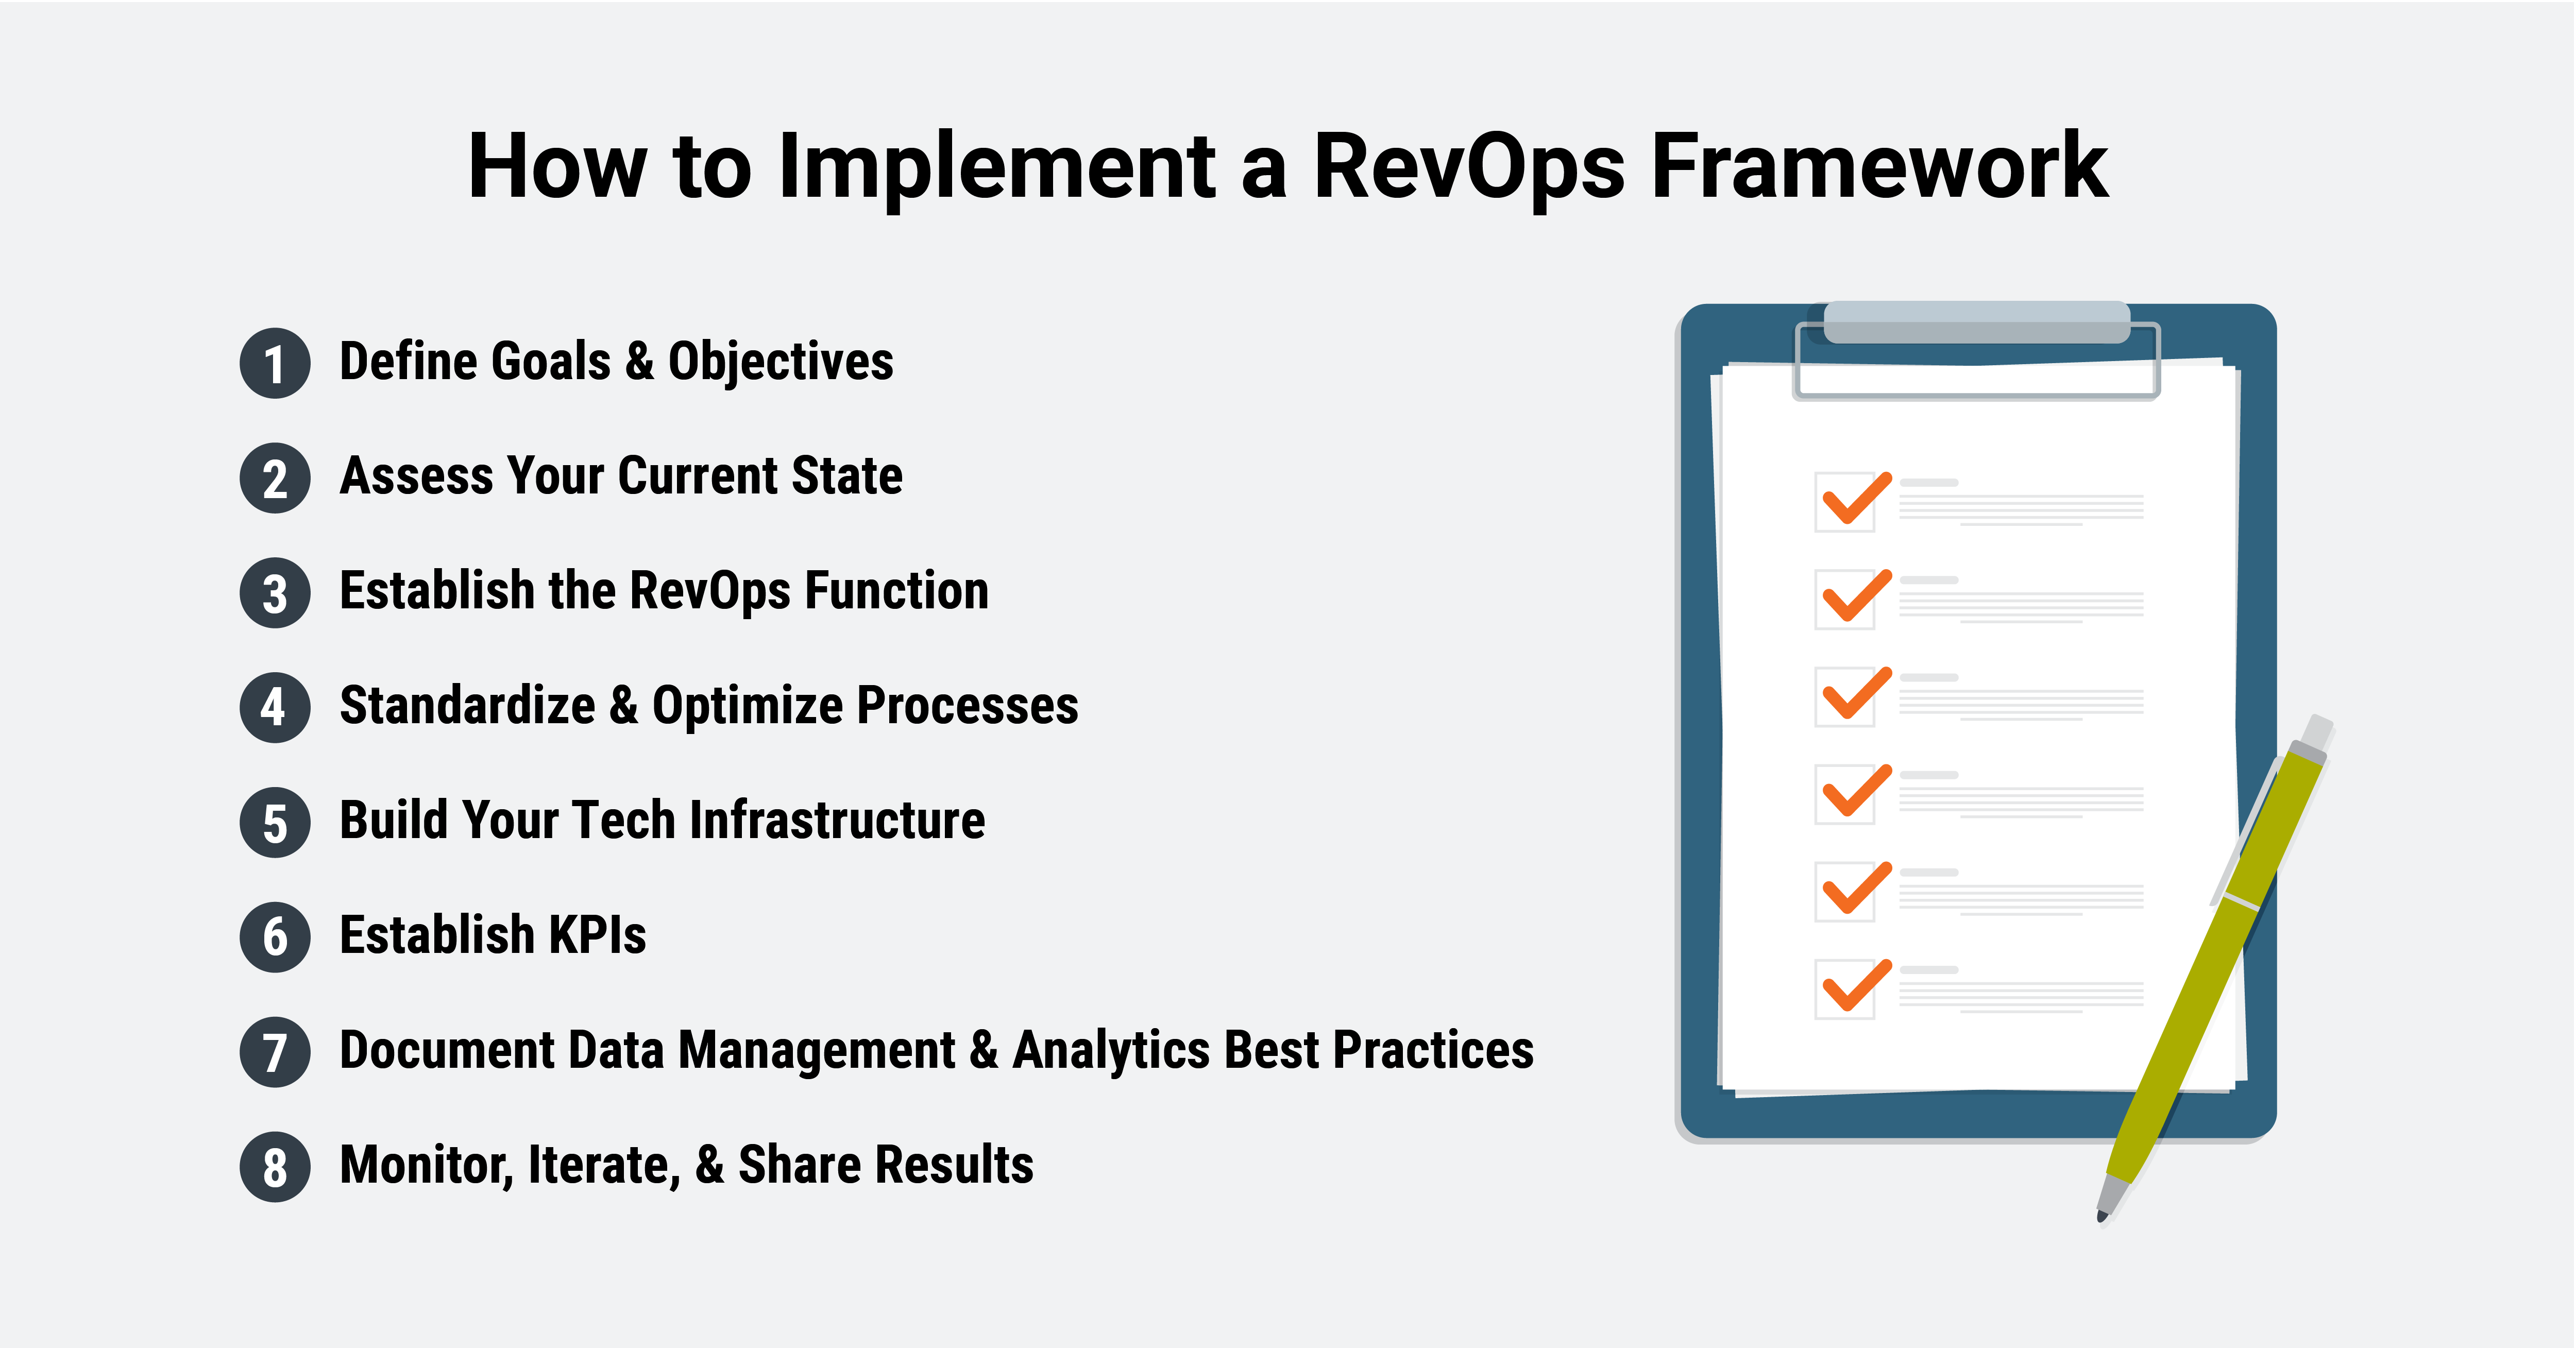 There are 9 steps to take when implementing a RevOps framework. 